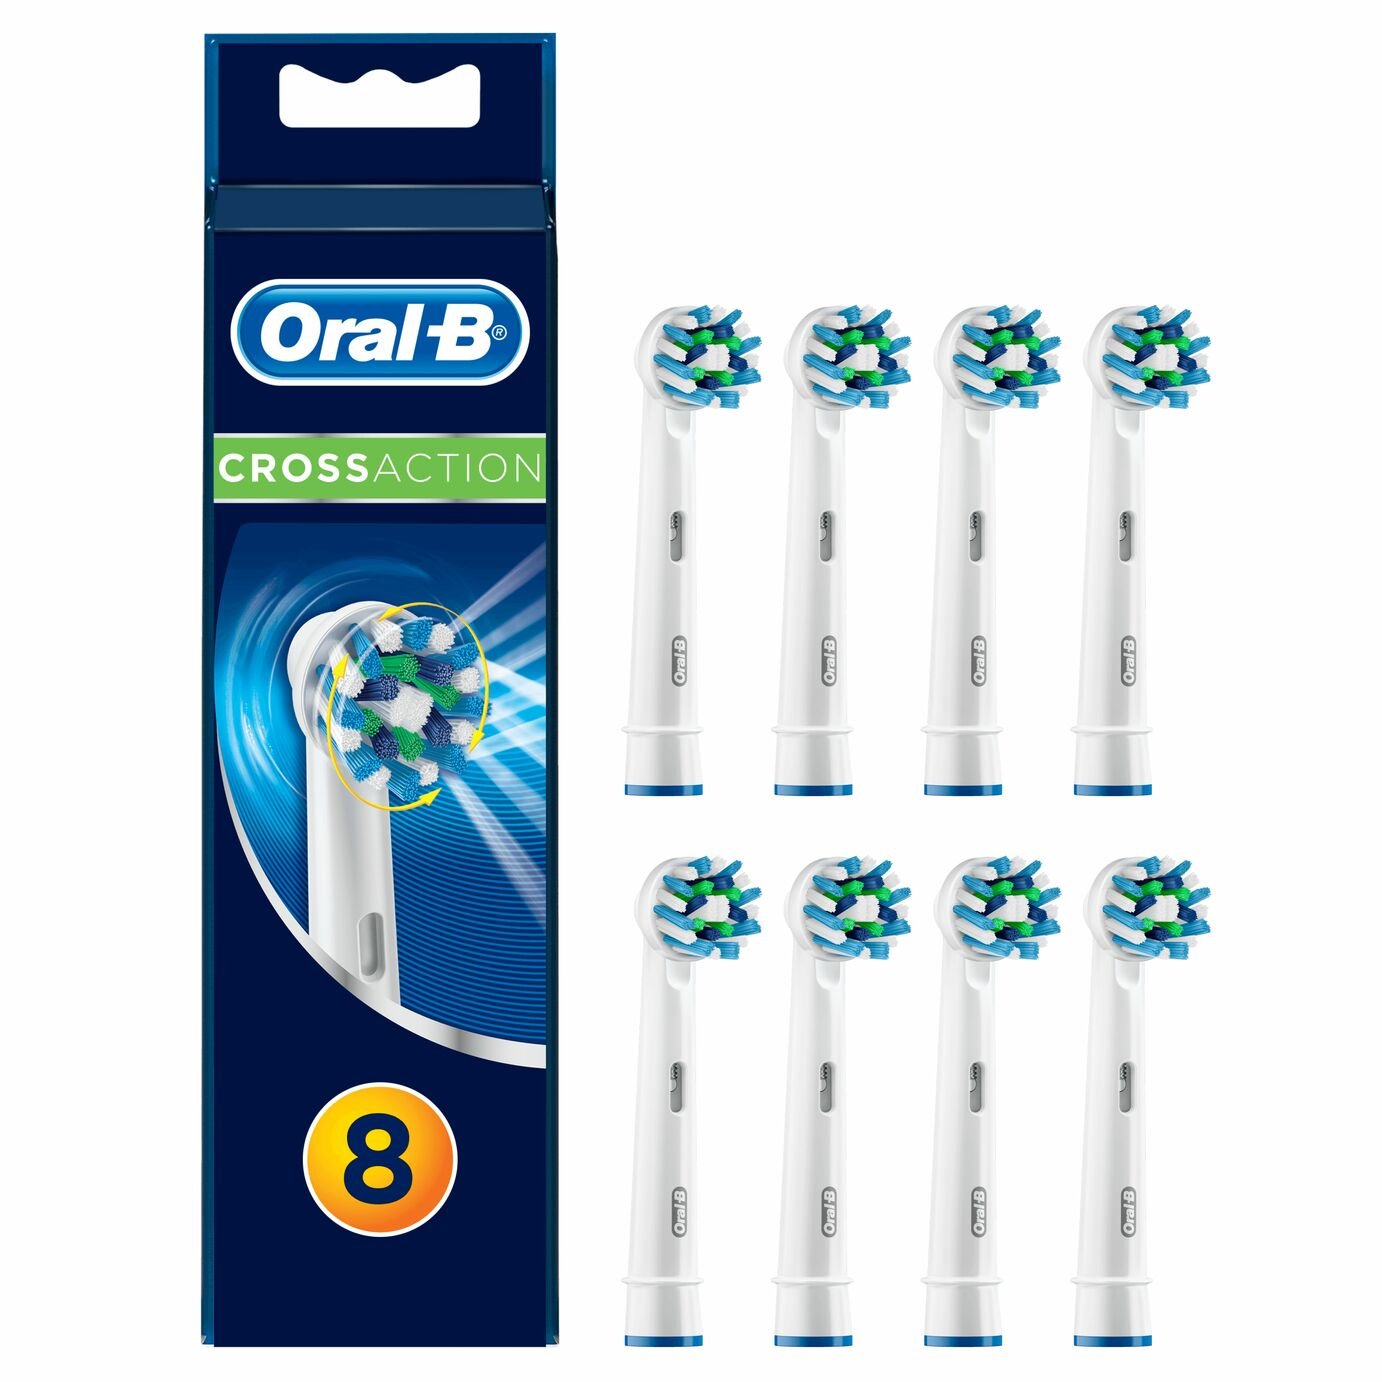 Oral-B CrossAction Electric Toothbrush Heads Review